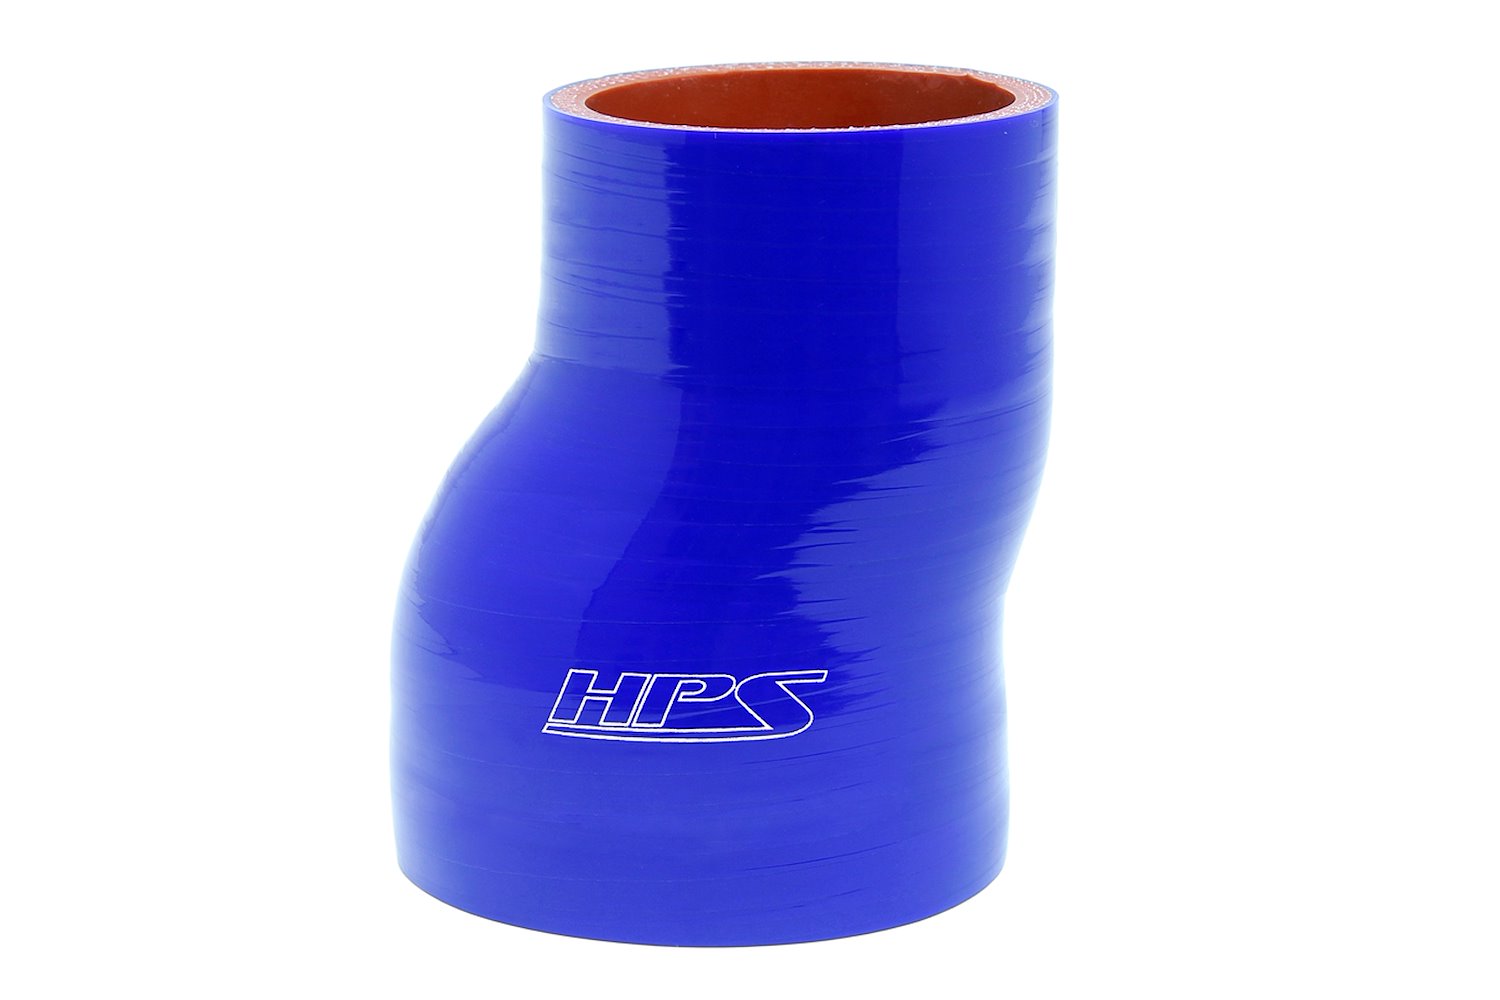 HTSOR-300-325-L6-BLUE Offset Reducer, High-Temp 4-Ply Reinforced, 3 in. ID To 3 1/4 in. ID, 6 in. Length.